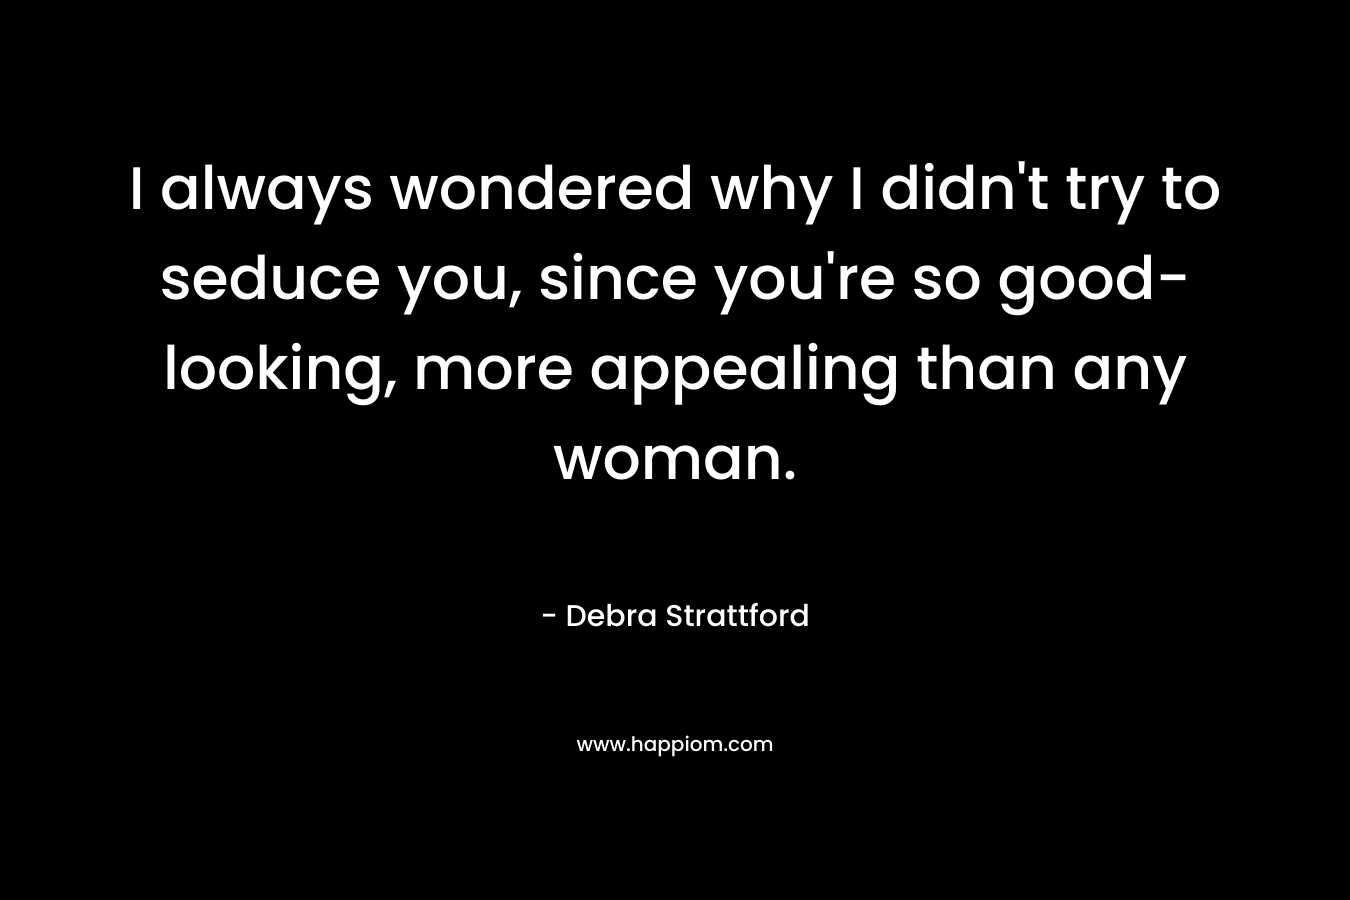 I always wondered why I didn’t try to seduce you, since you’re so good-looking, more appealing than any woman. – Debra Strattford